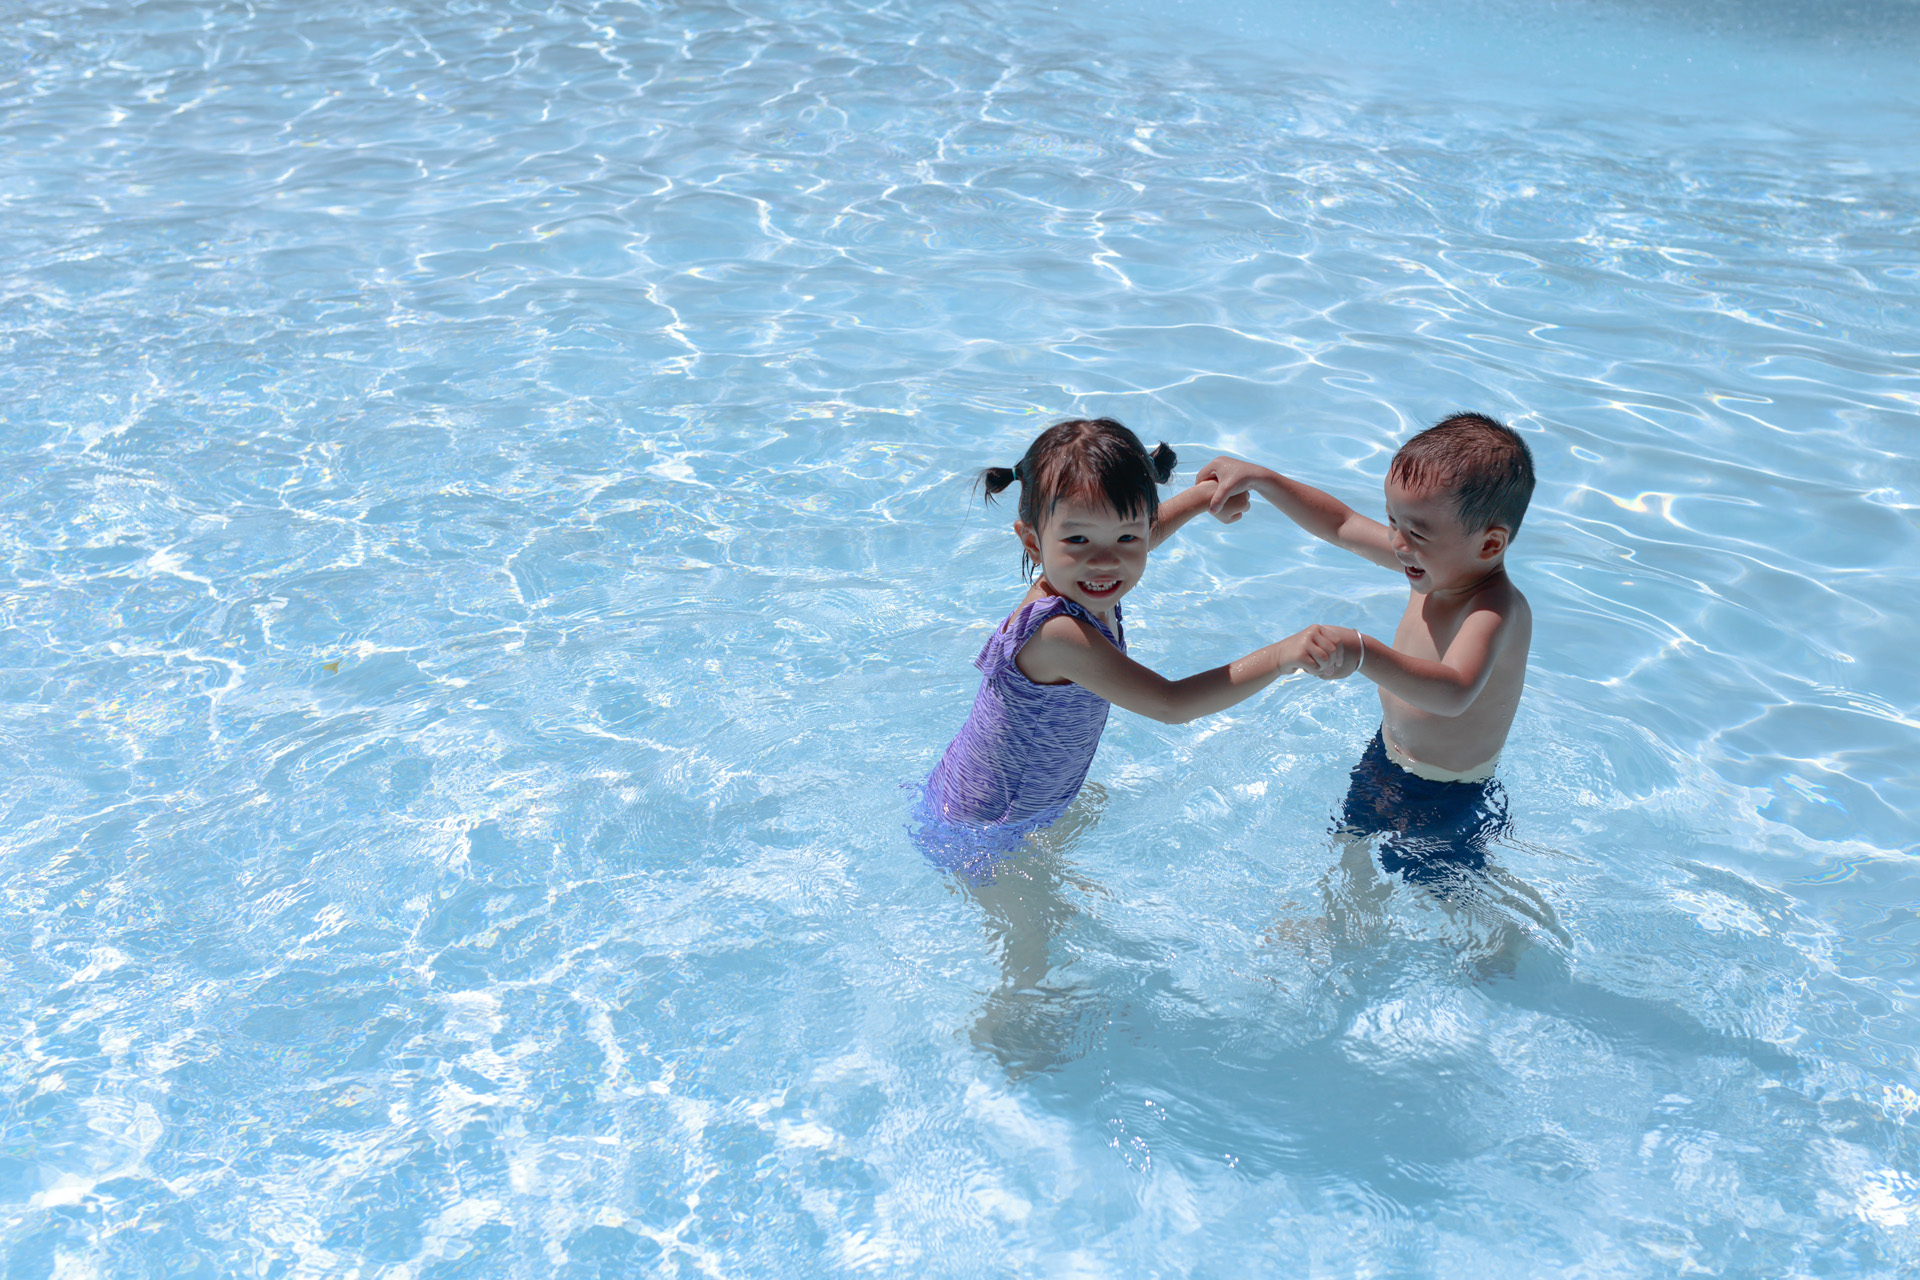 Two young kids at a water park